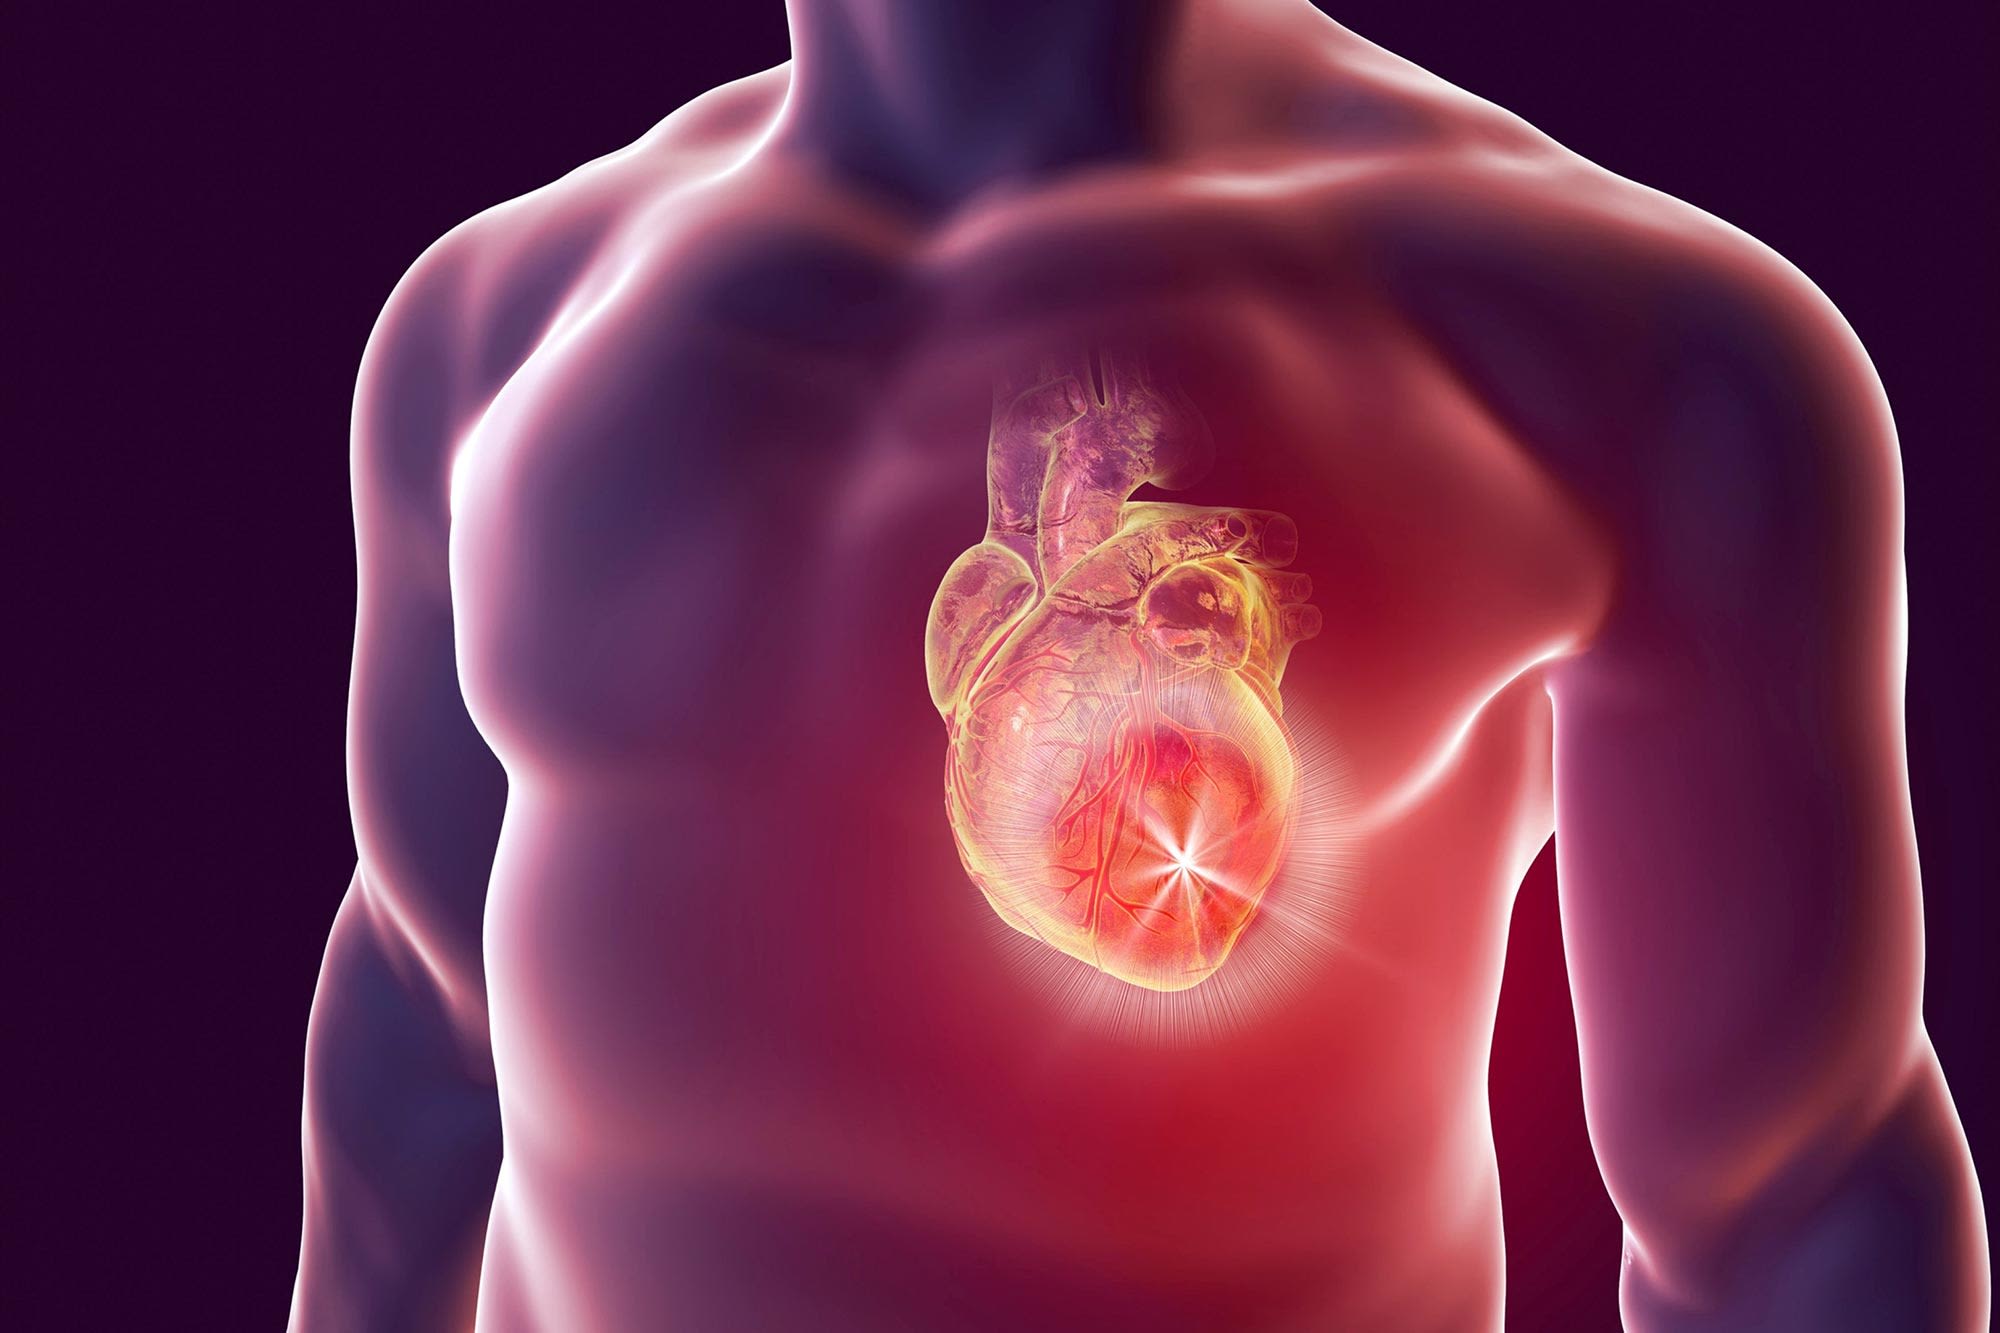 Concerning Findings – This Severe Heart Disease Is Becoming Much More Common